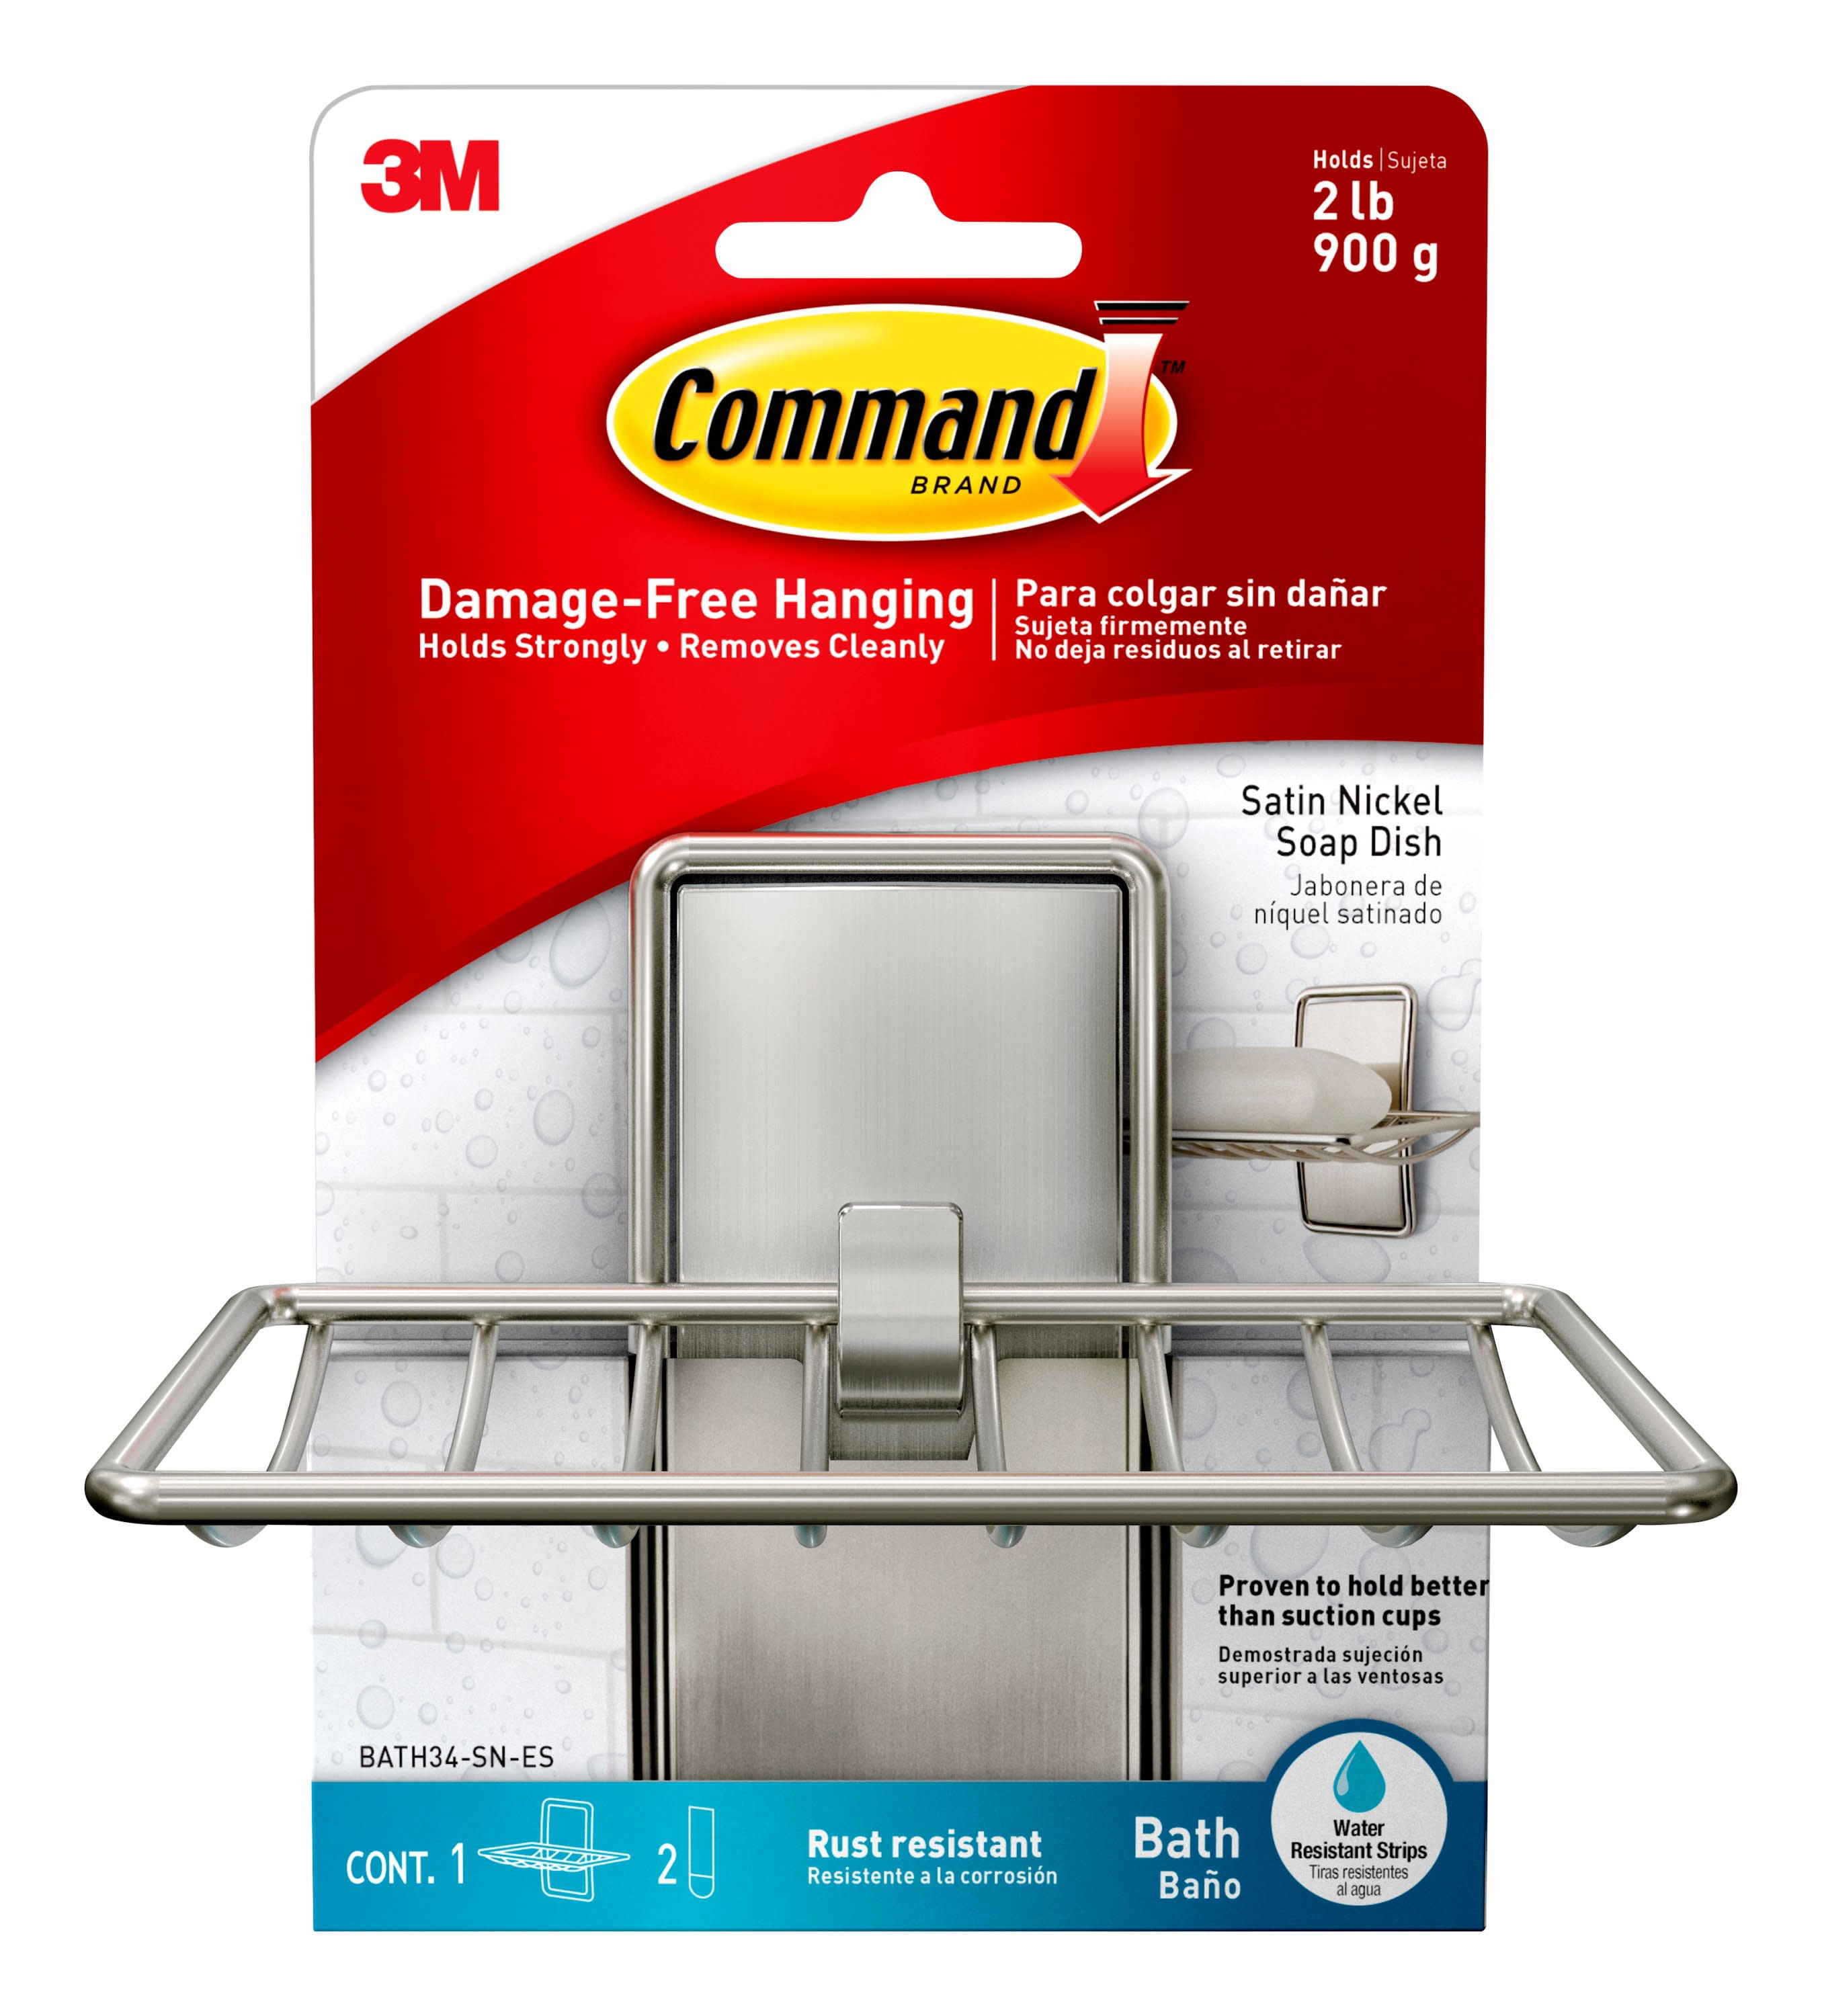 Details about   3M BATH14 Command Soap Dish Bath Adhesive Damage Free Plastic 2-Pack Frosted 